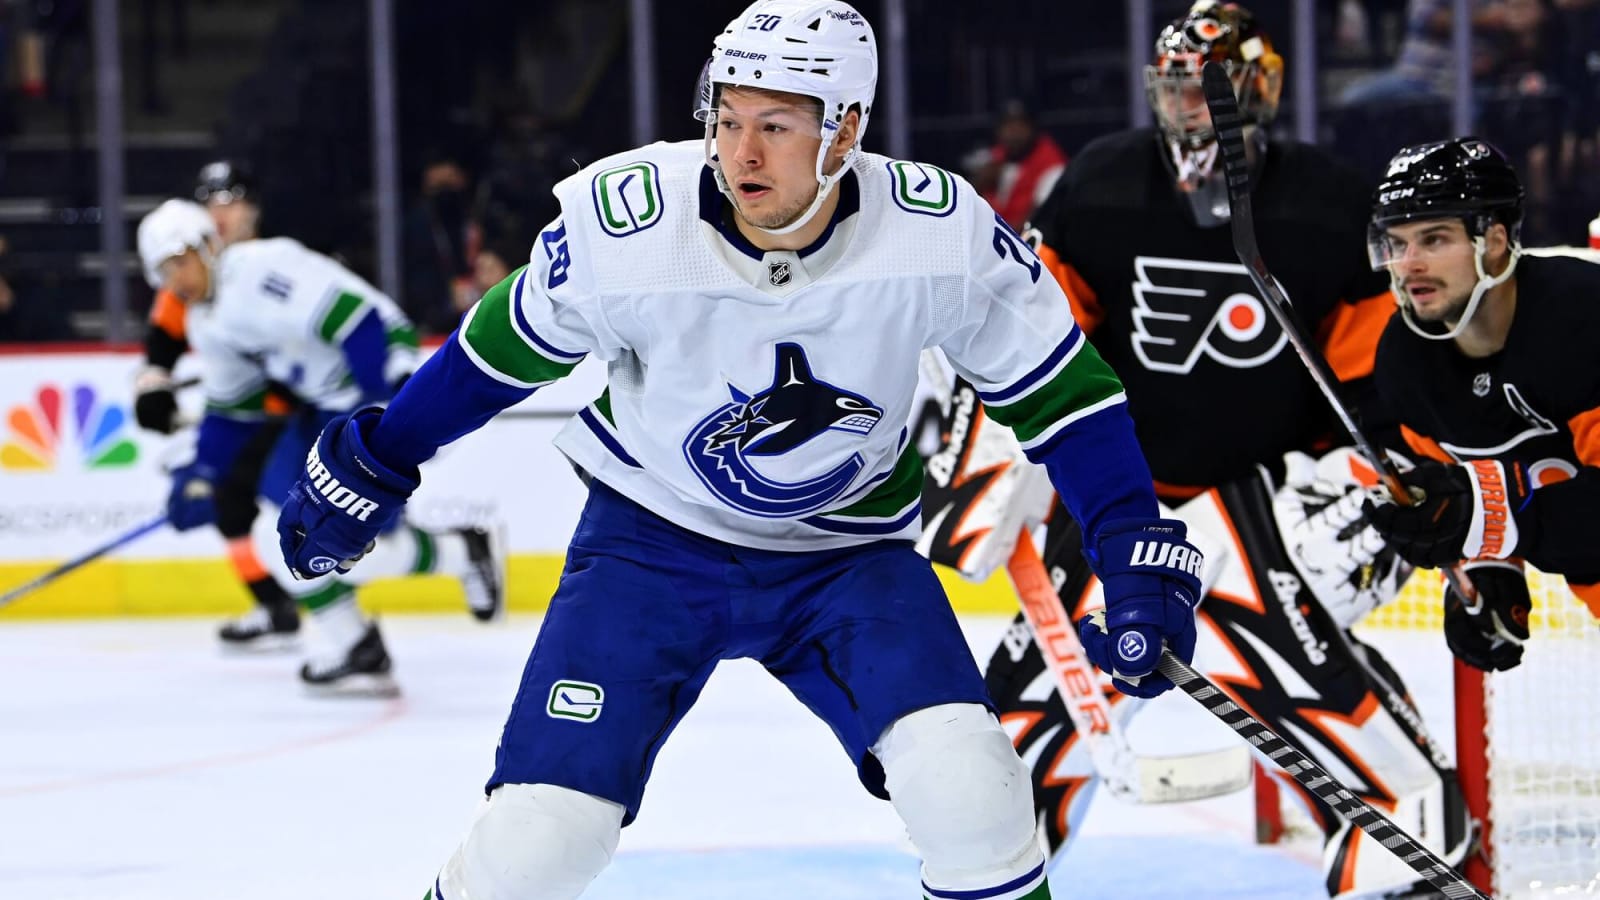 Vancouver Canucks activate forward Curtis Lazar from injured reserve